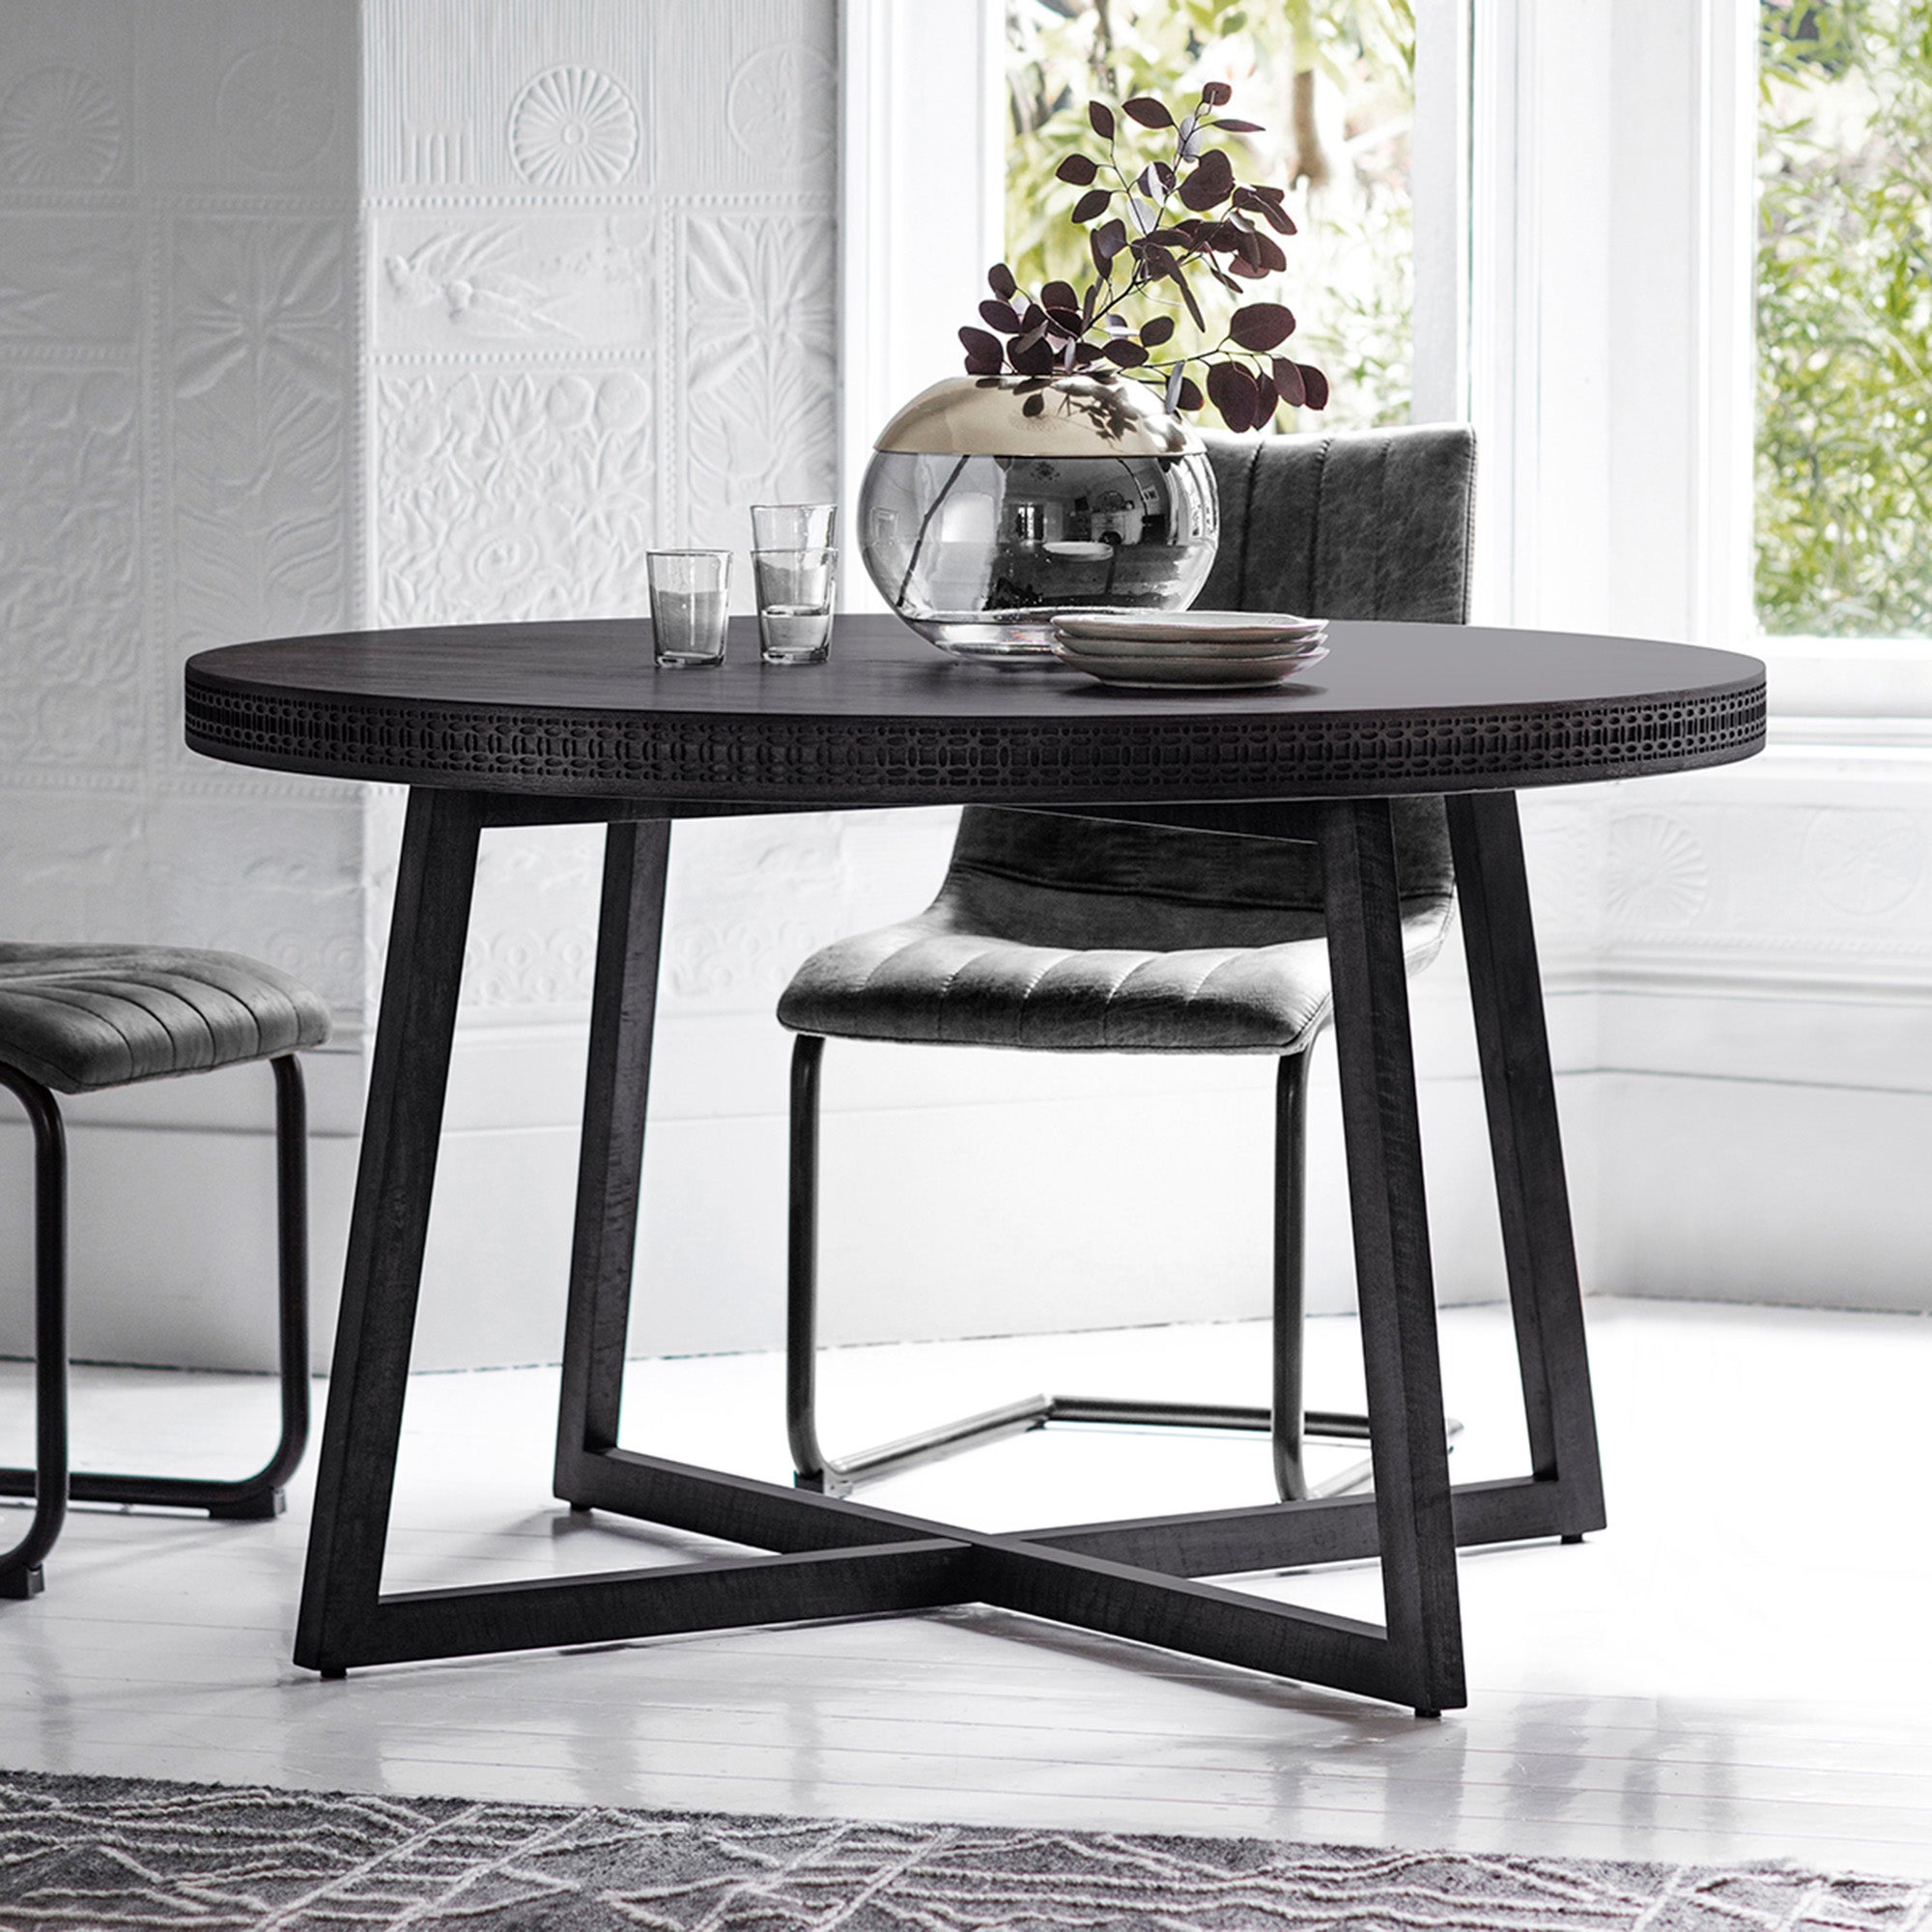 Cantwell 4 Seater Round Dining Table Mango Wood Black